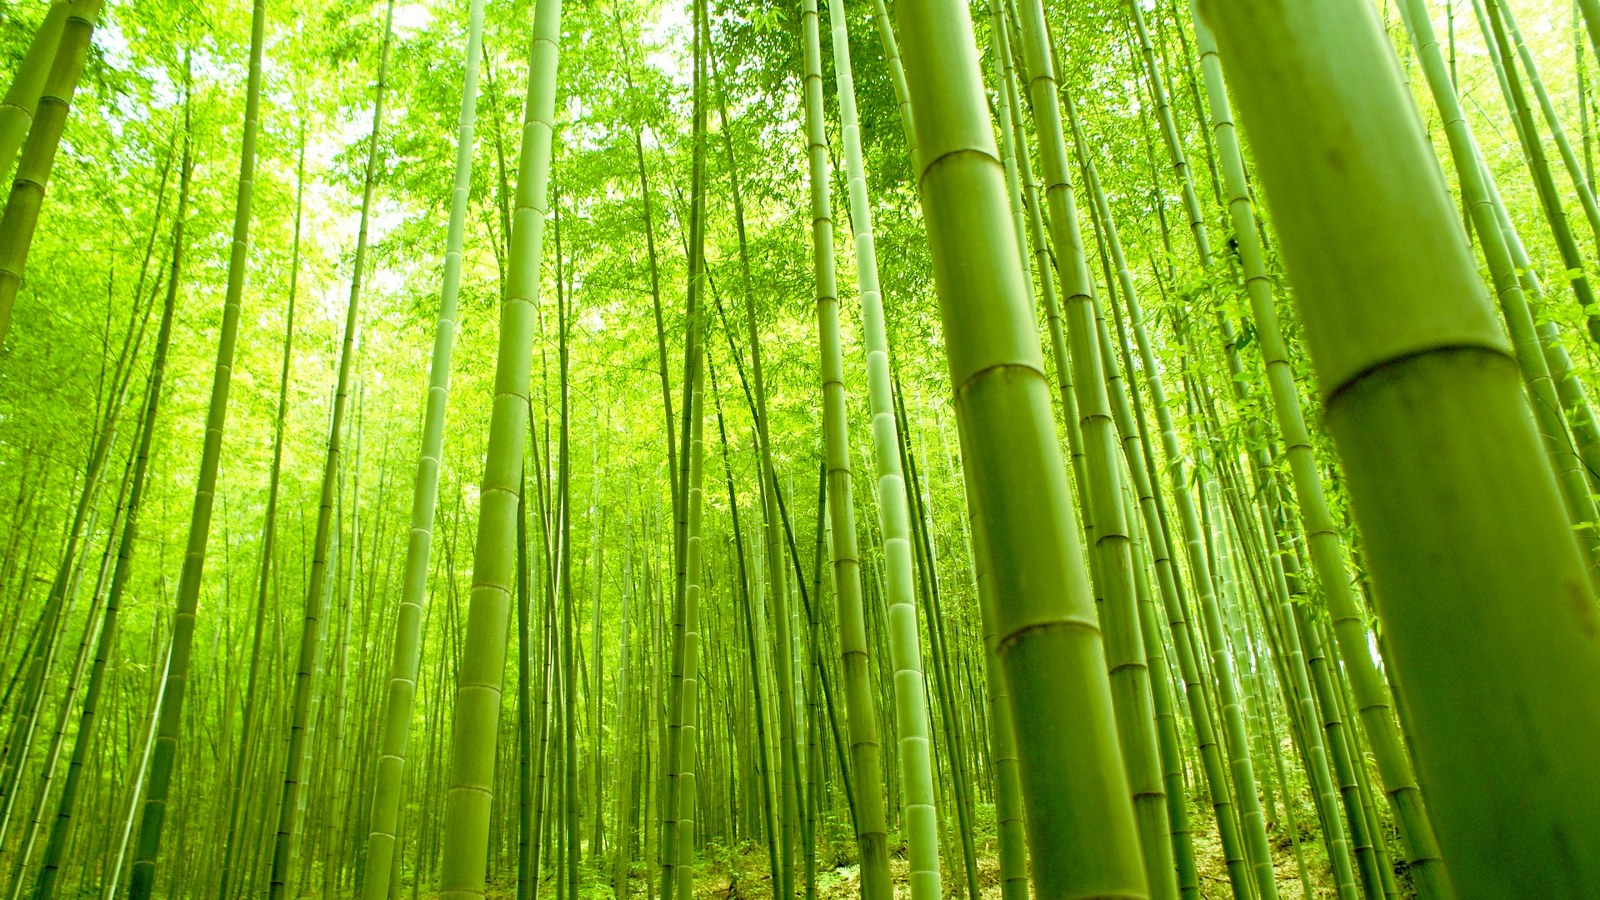 Bamboo Pics, Earth Collection